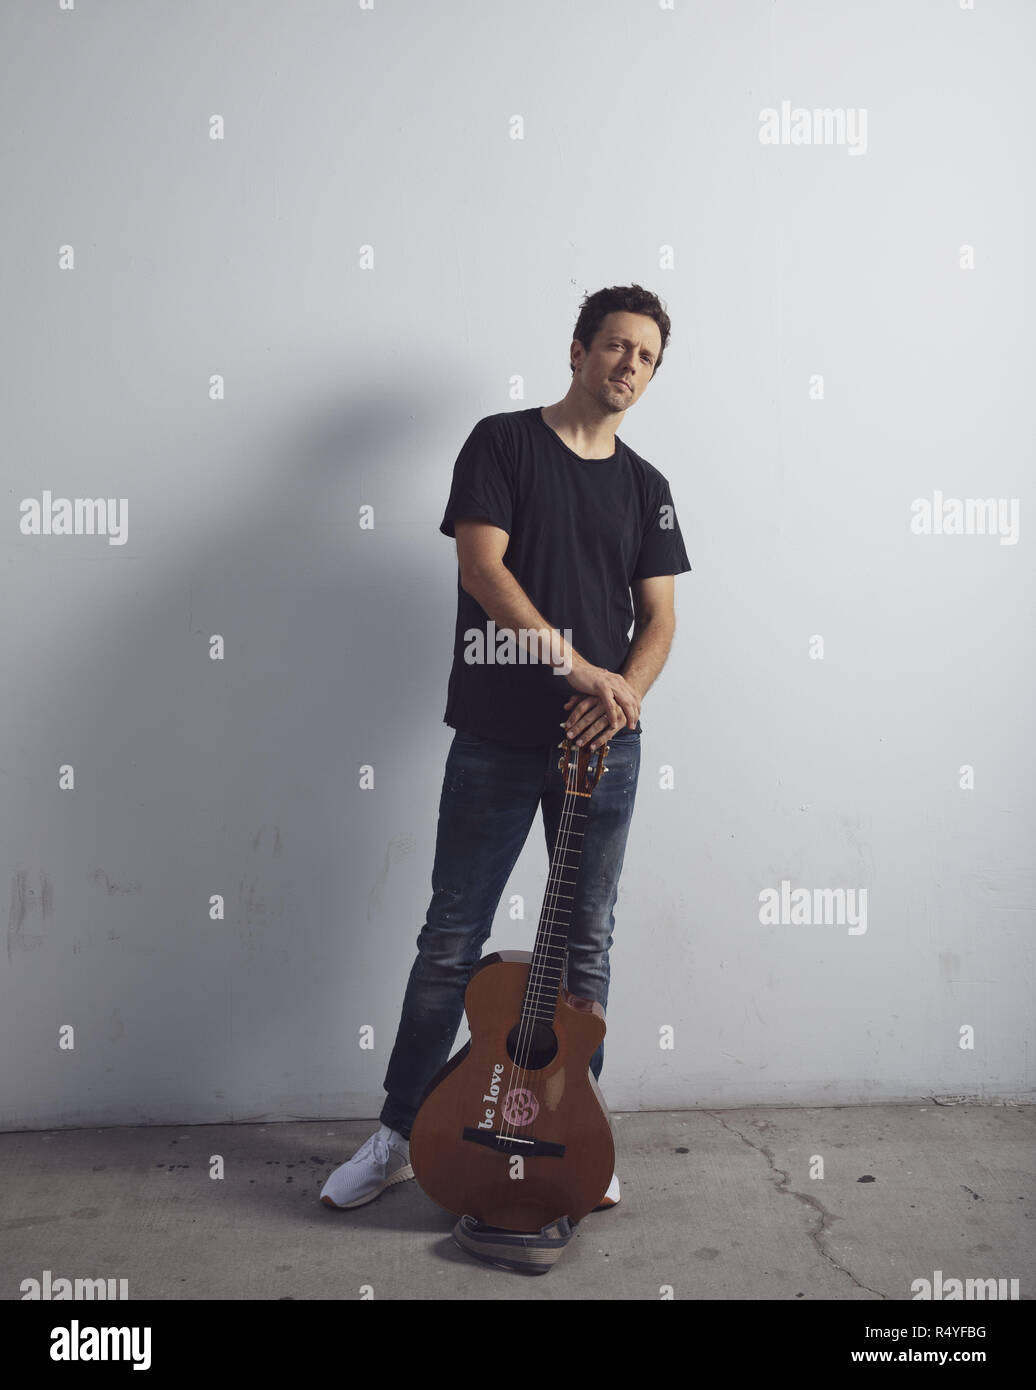 July 10, 2018 - 2018-07-10, Los Angeles CA. Portrait session with Jason Mraz. Jason Mraz is an American singer-songwriter who first came to prominence in the San Diego coffee shop scene in 2000. In 2002, he released his debut studio album, Waiting for My Rocket to Come, which contained the hit single ''The Remedy (I Won't Worry)''. With the release of his second album, Mr. A-Z, in 2005, Mraz achieved major commercial success. The album peaked at number 5 on the Billboard 200 and sold over 100,000 copies in the US (Credit Image: © Brian LoweZUMA Wire) Stock Photo